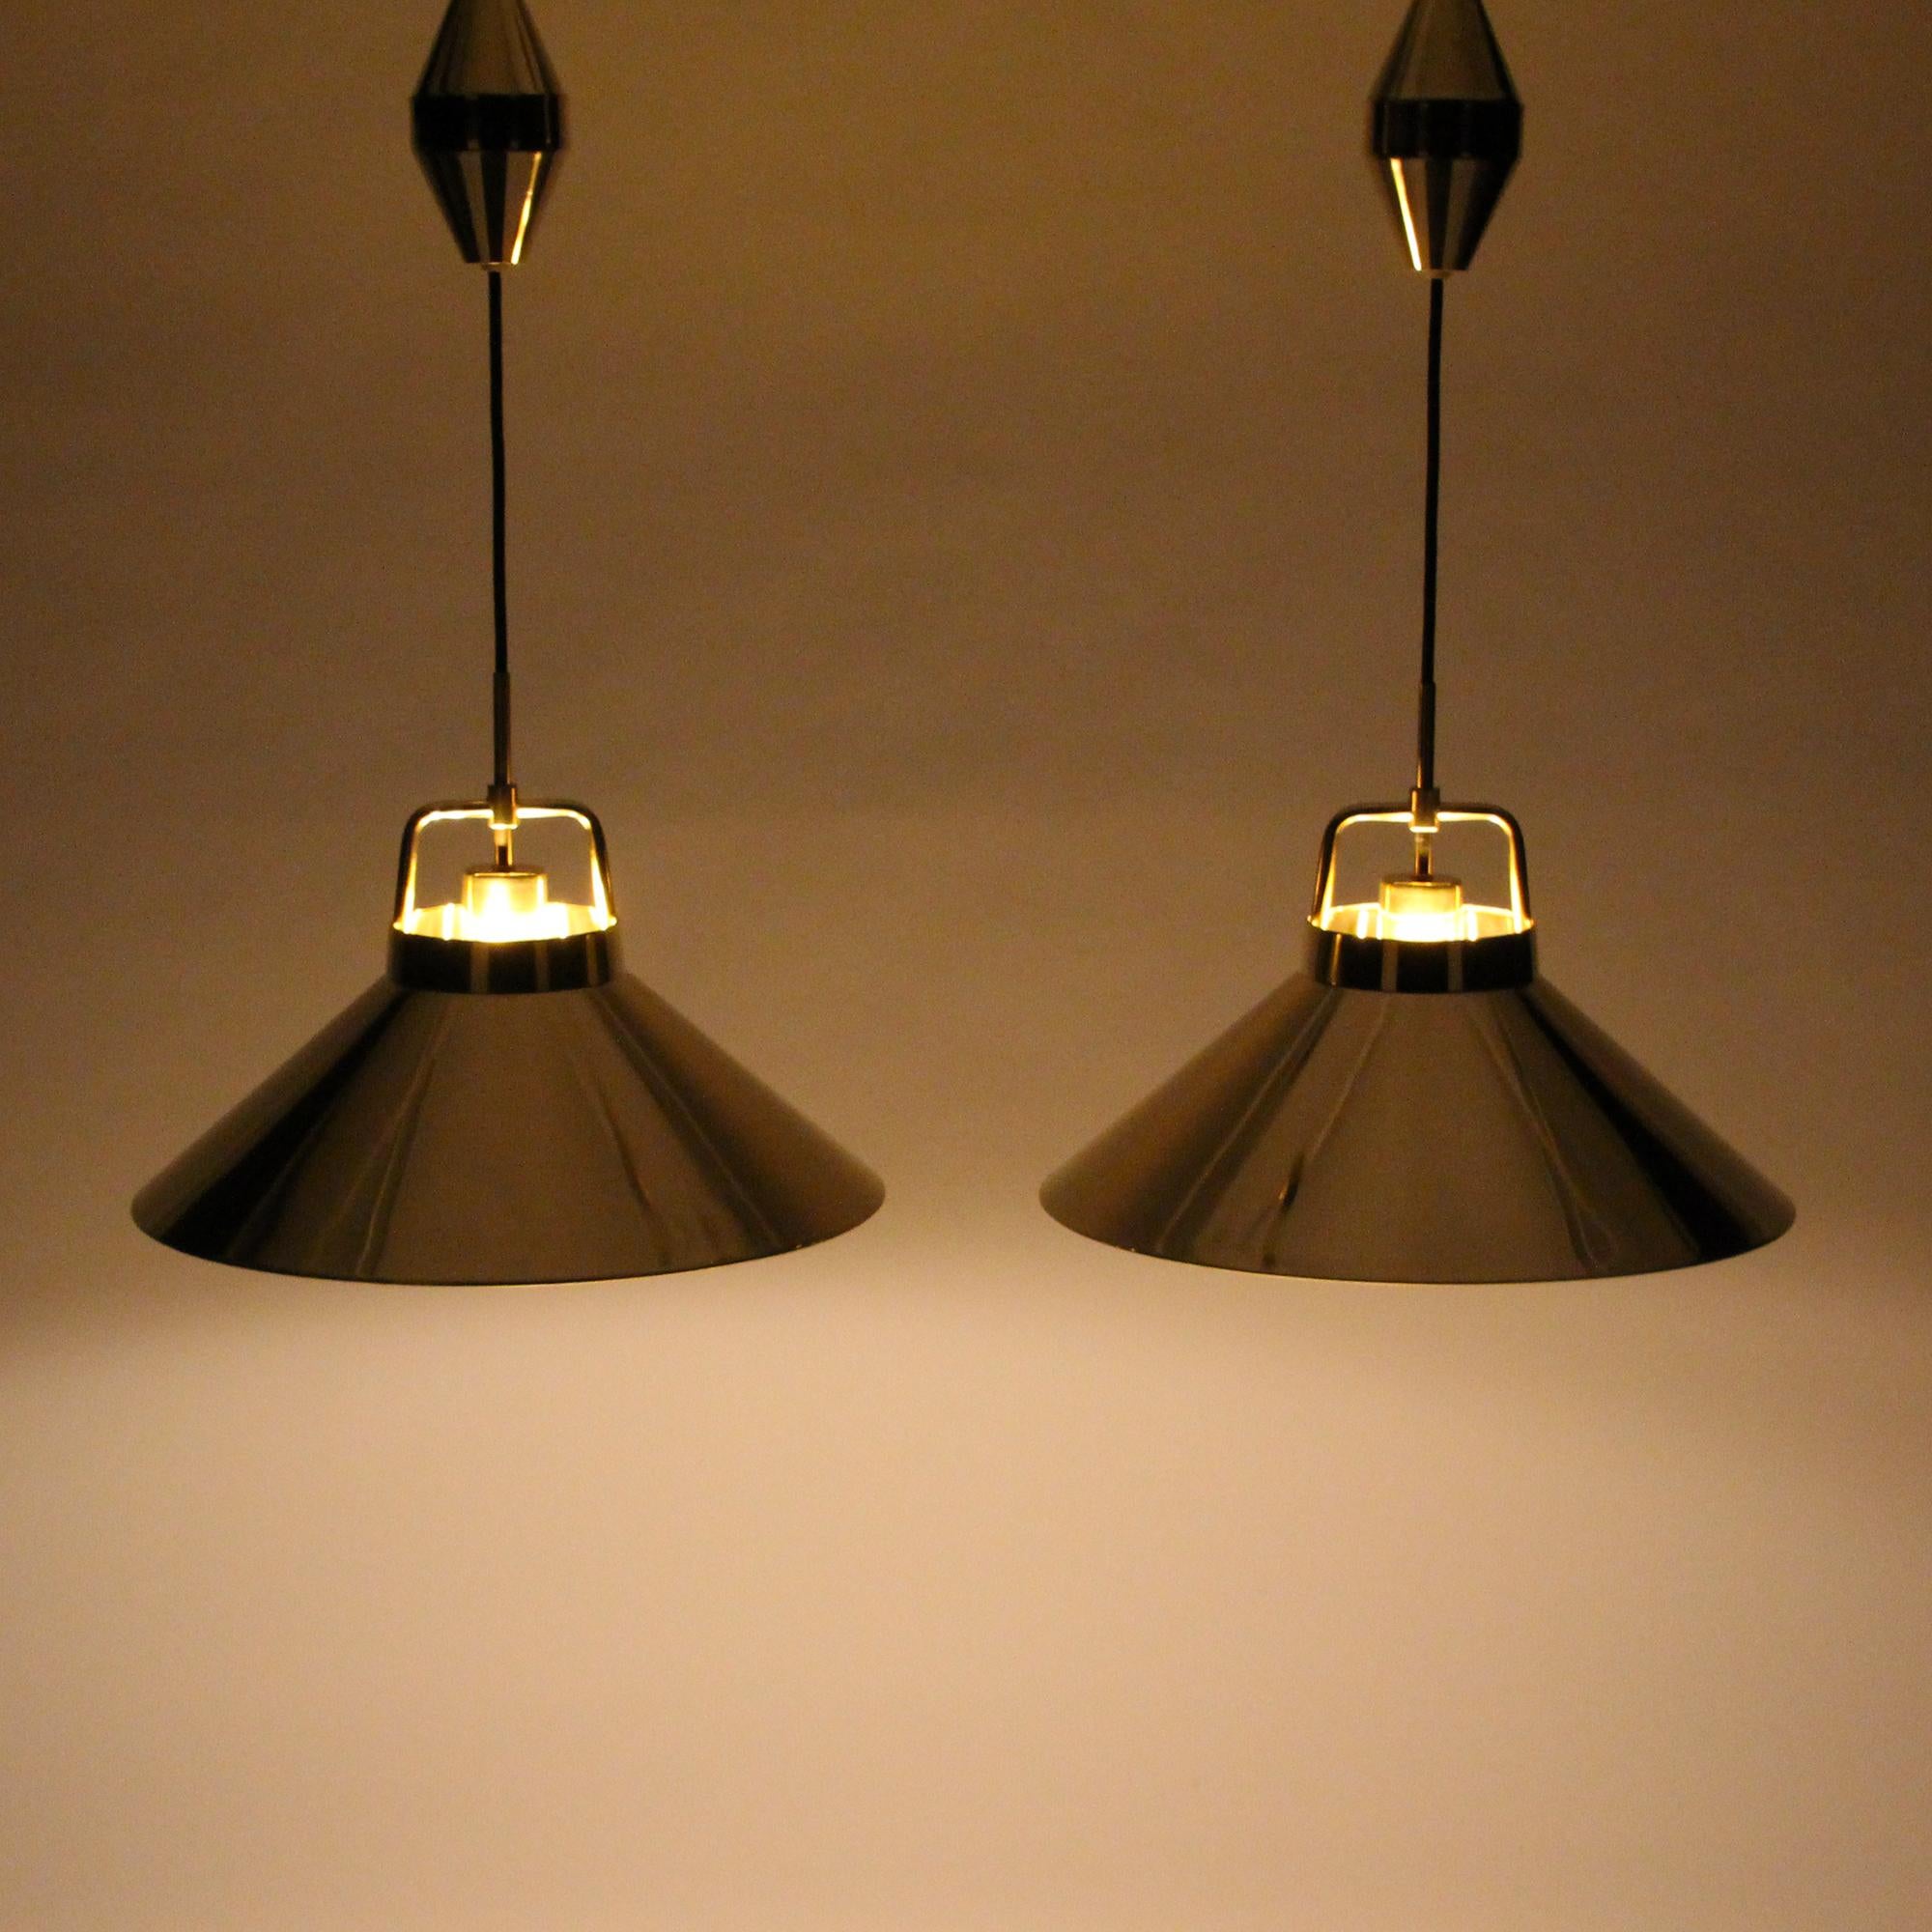 20th Century P295 Pendant Pair by Fritz Schlegel in 1938 for Lyfa with Brass Suspensions